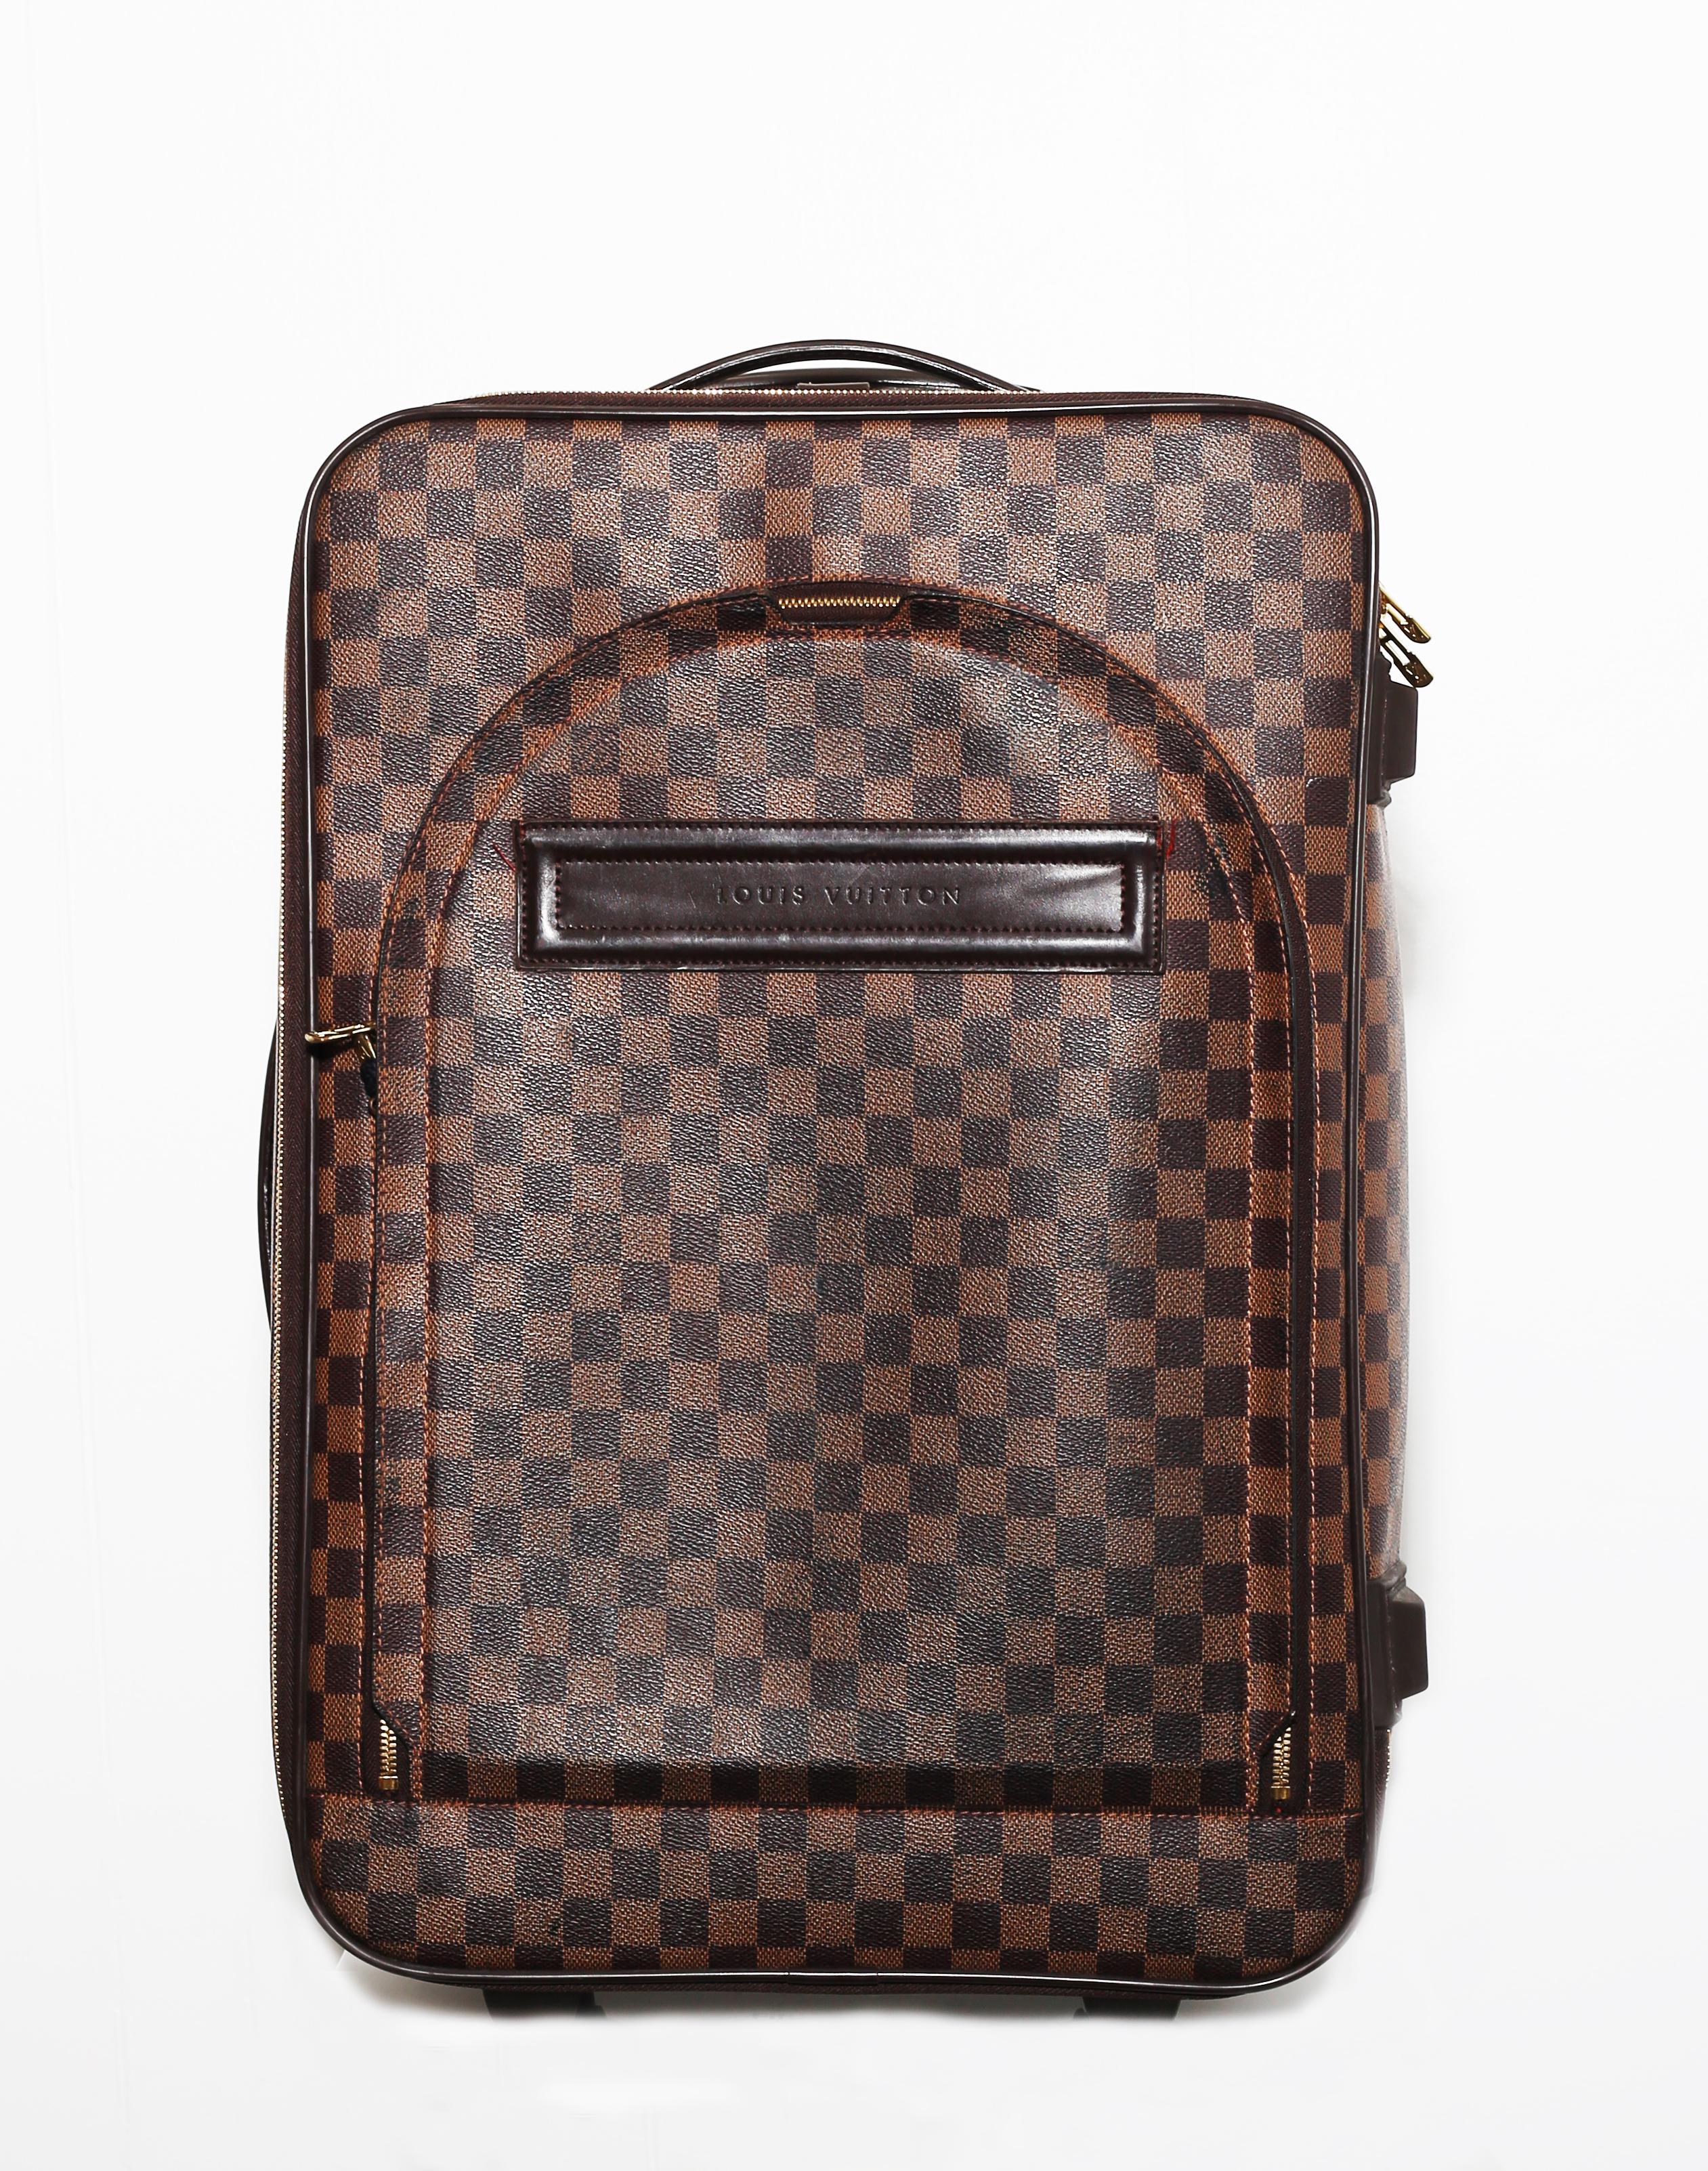 Brown Louis Vuitton Damier Pégase 55 Travel Trolley Bag  Luggage For Sale